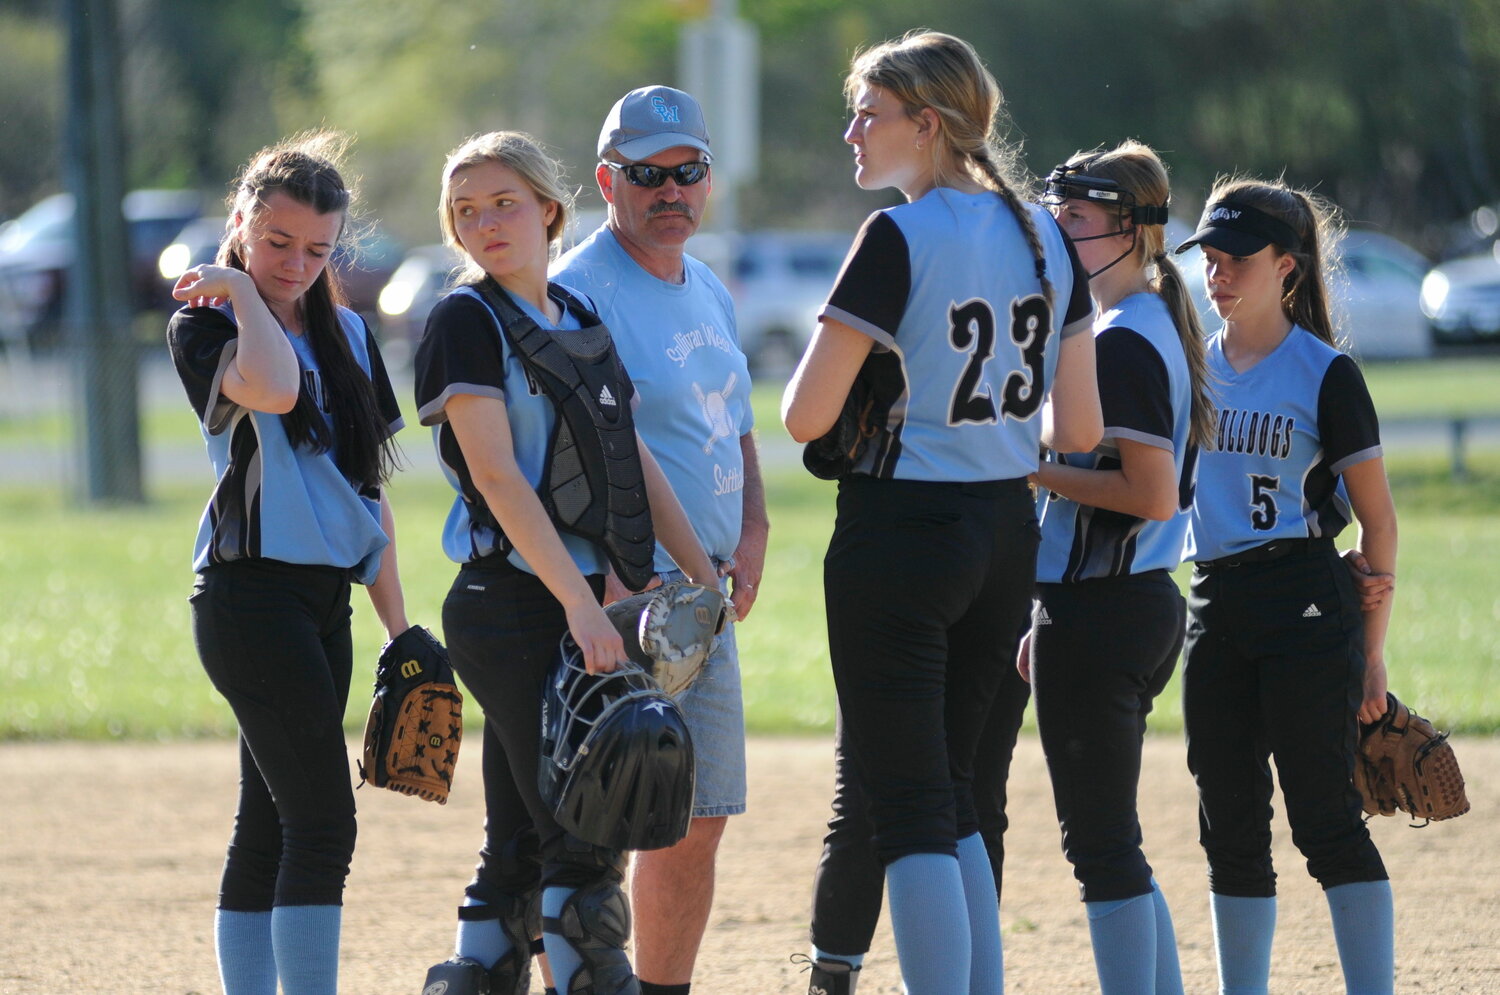 Meeting on the mound. Pictured are Hannah Abplanalp, left; Nicole Reeves; Coach Anthony Durkin; Elaine Herbert; Liz Reeves; and Sam Heller...